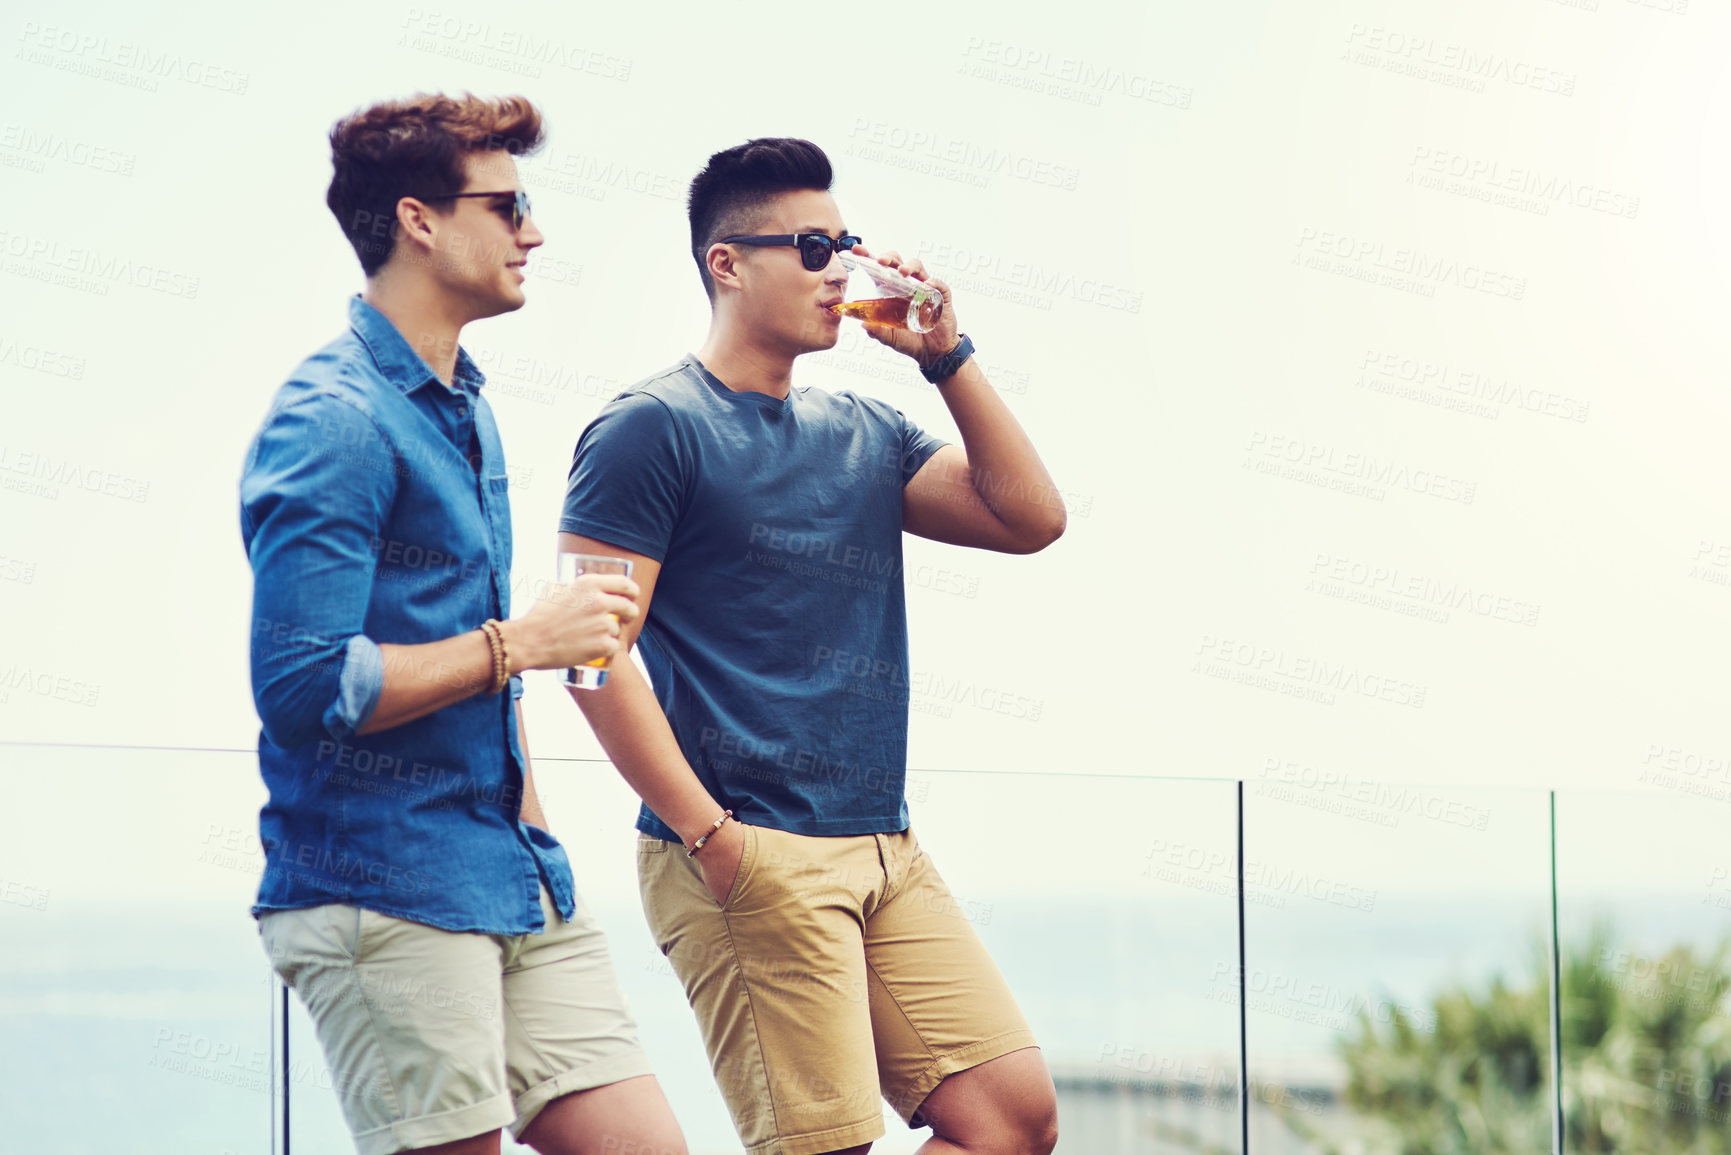 Buy stock photo Shot of two handsome young men having drinks and relaxing outdoors while on holiday